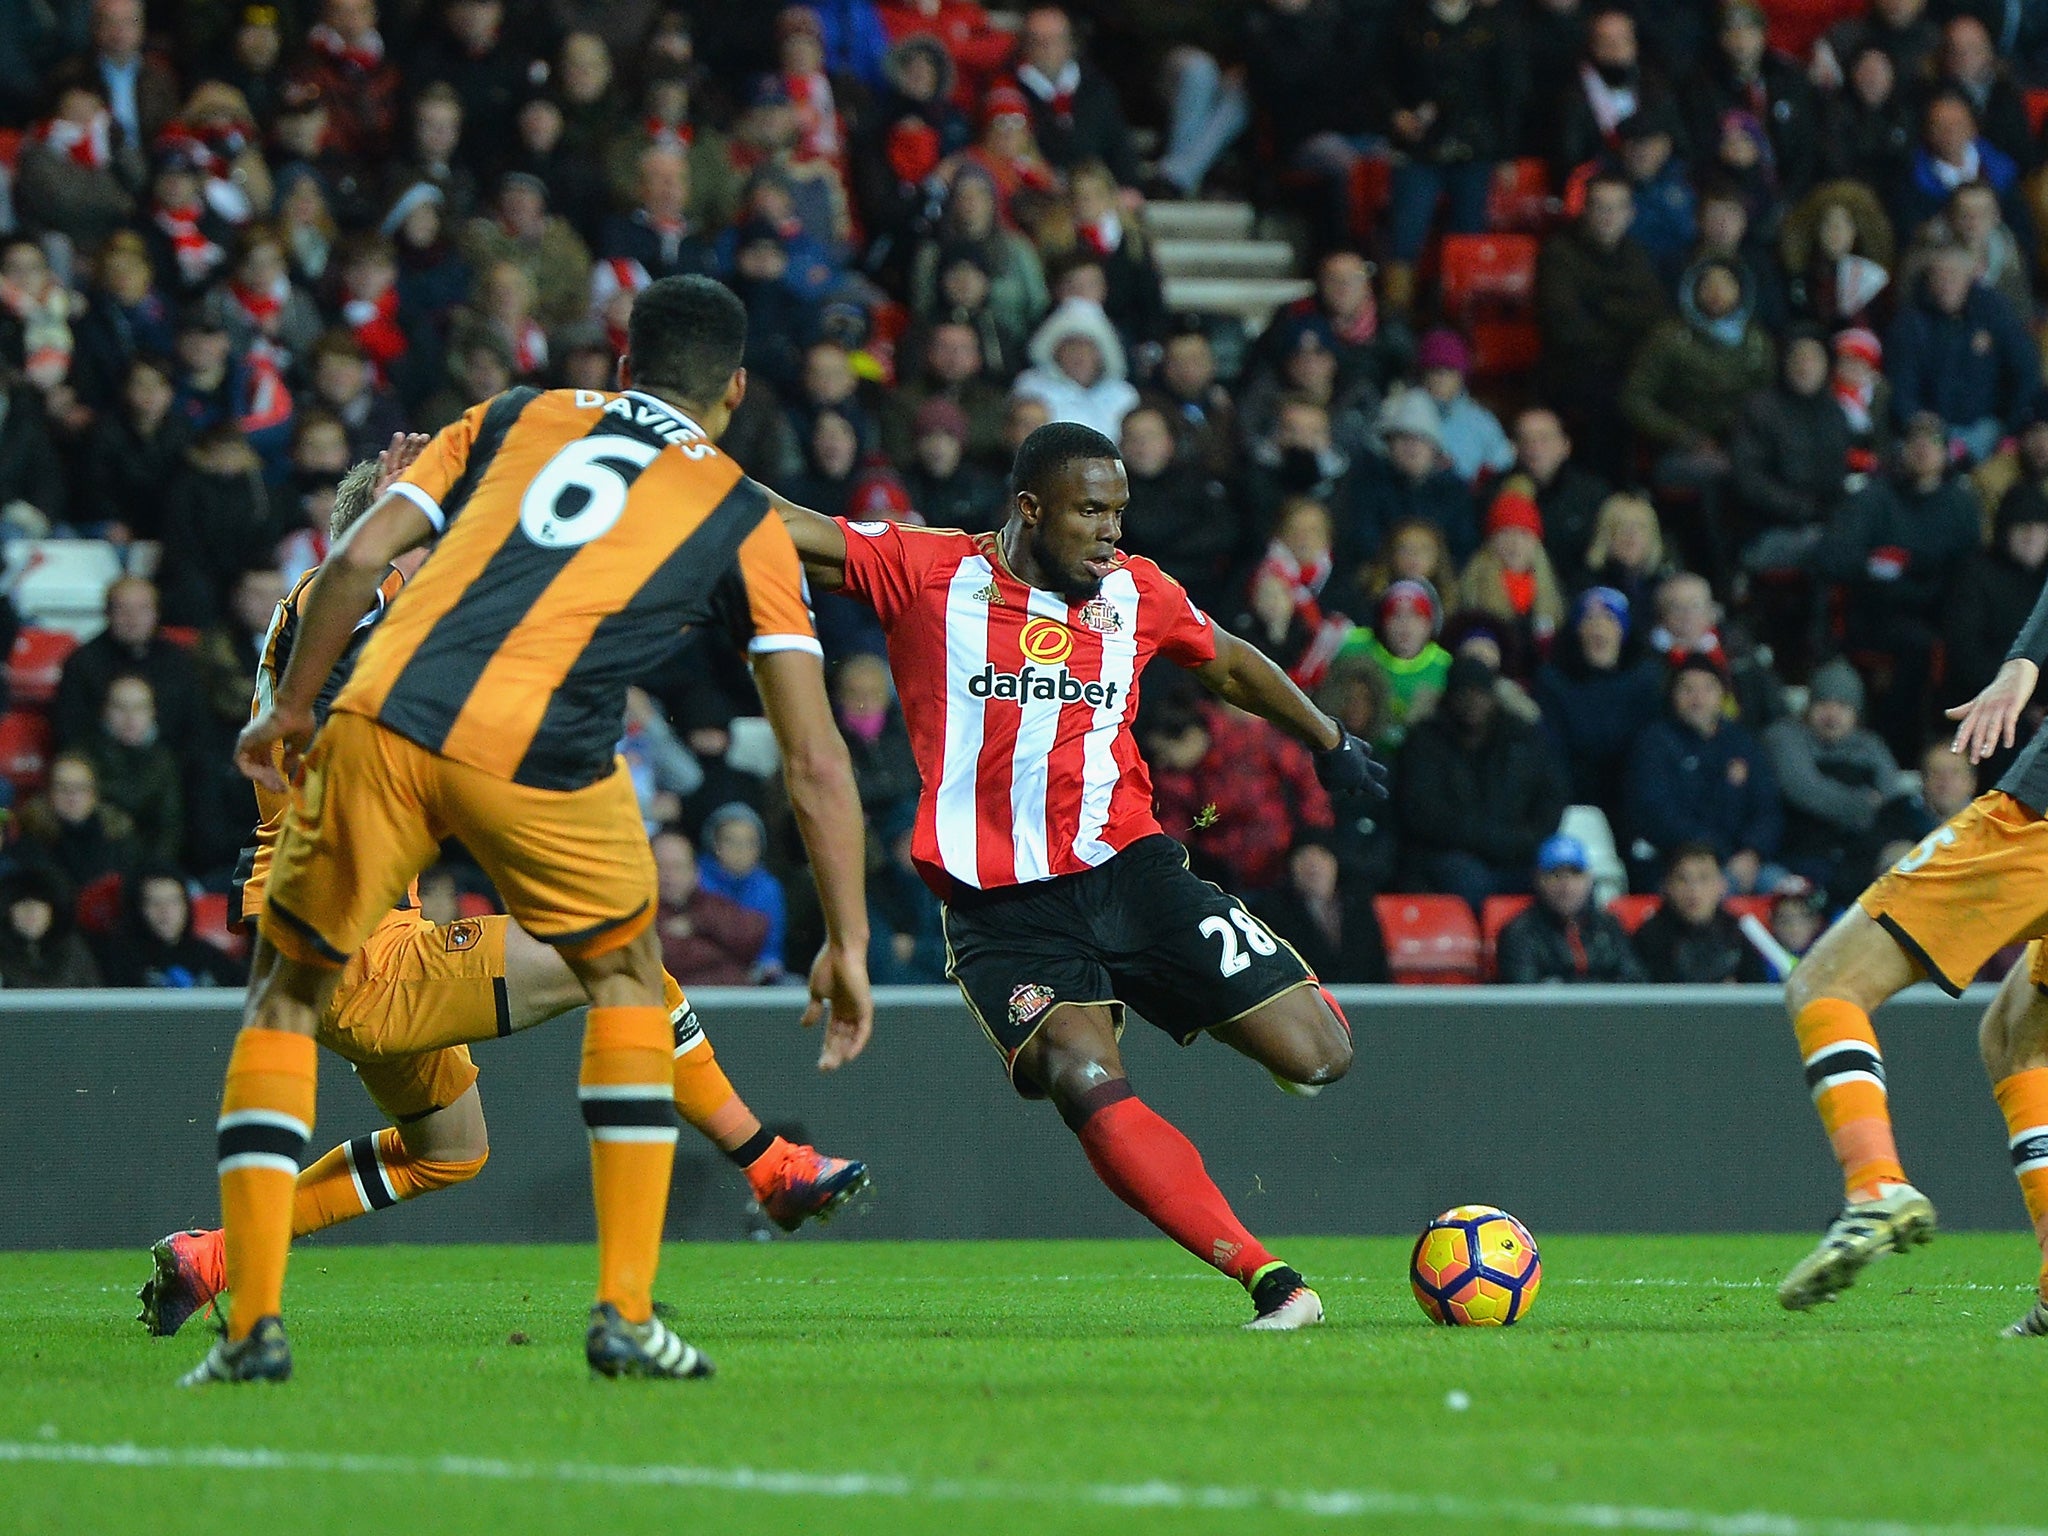 Anichebe doubled the Black Cats' lead in the second half